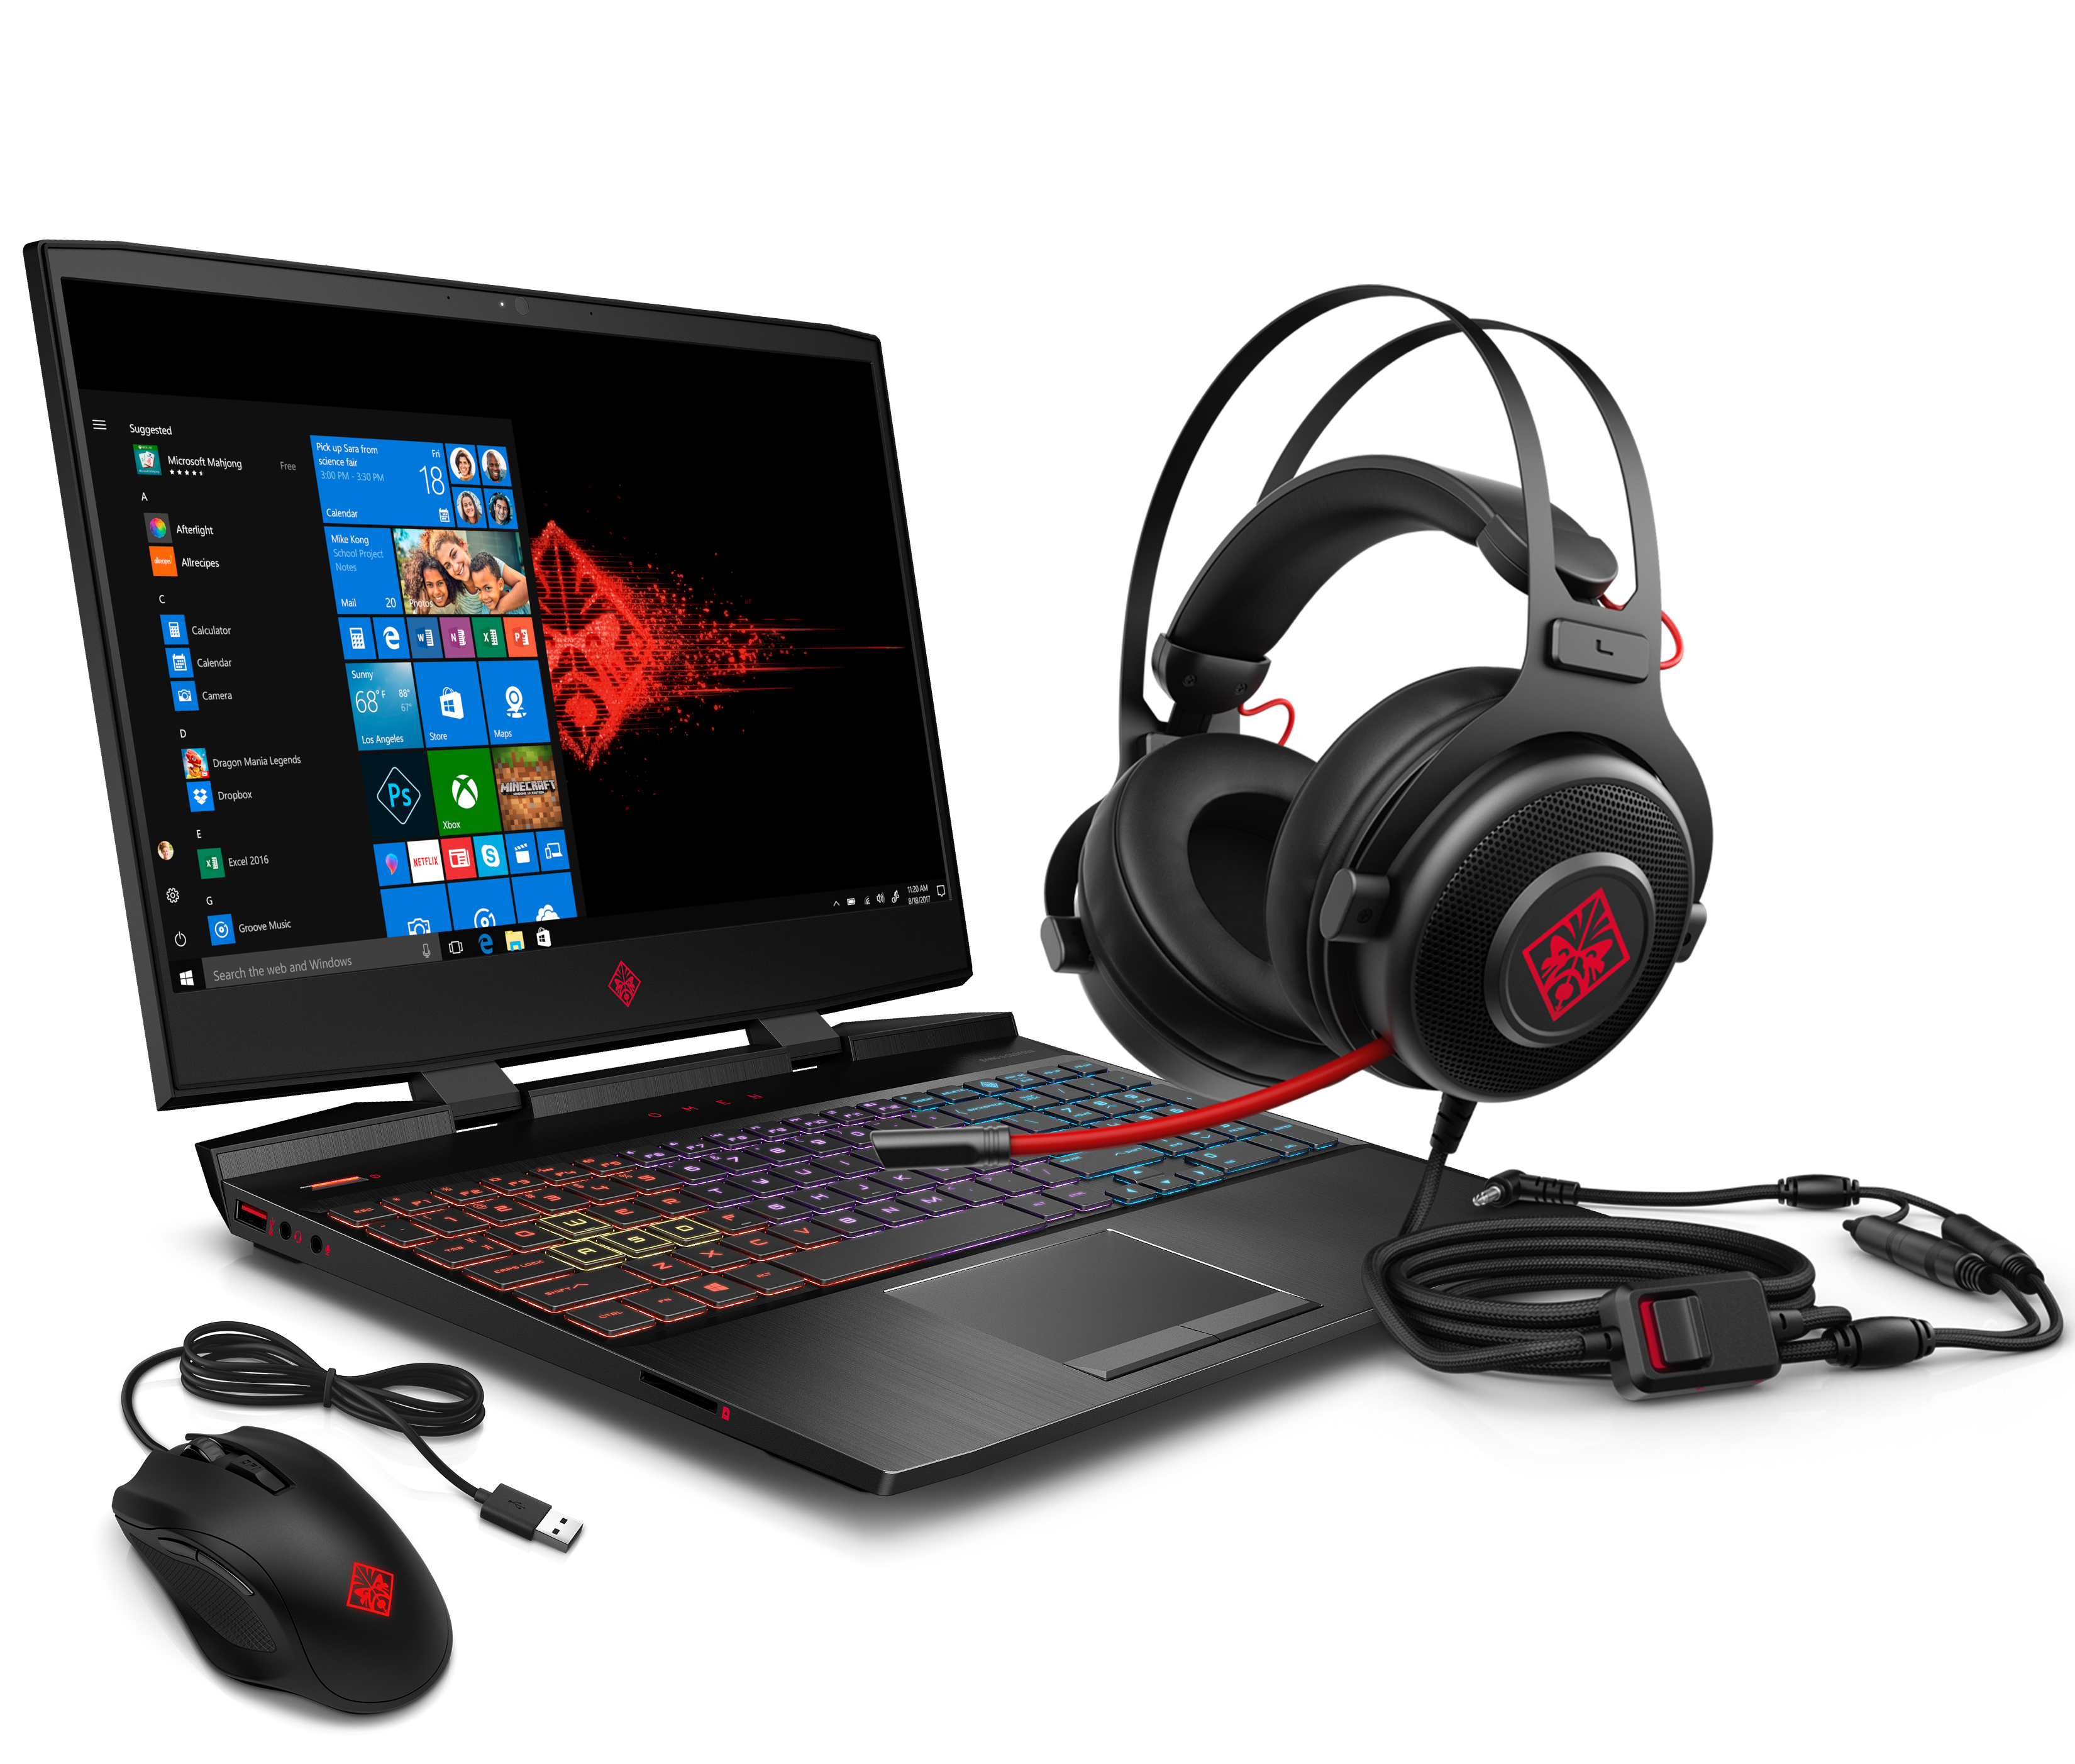 This Hp Omen 15 Gaming Laptop On Sale For Just 950 And Includes A Free Headset And Mouse Pc Gamer